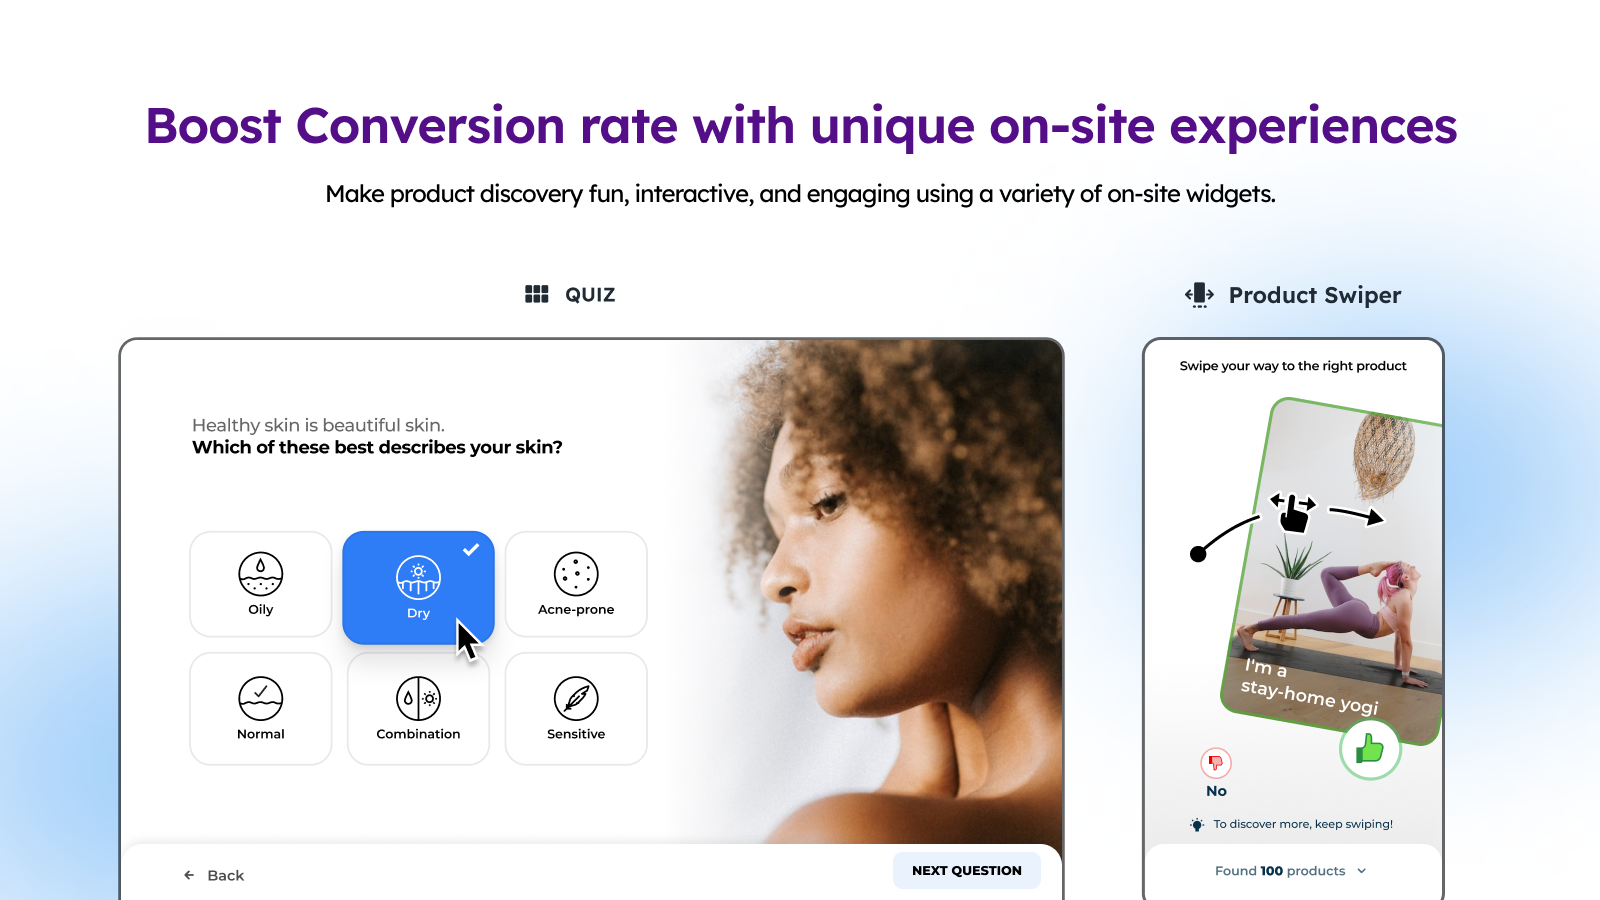 Boost Conversion rate with unique on-site experiences